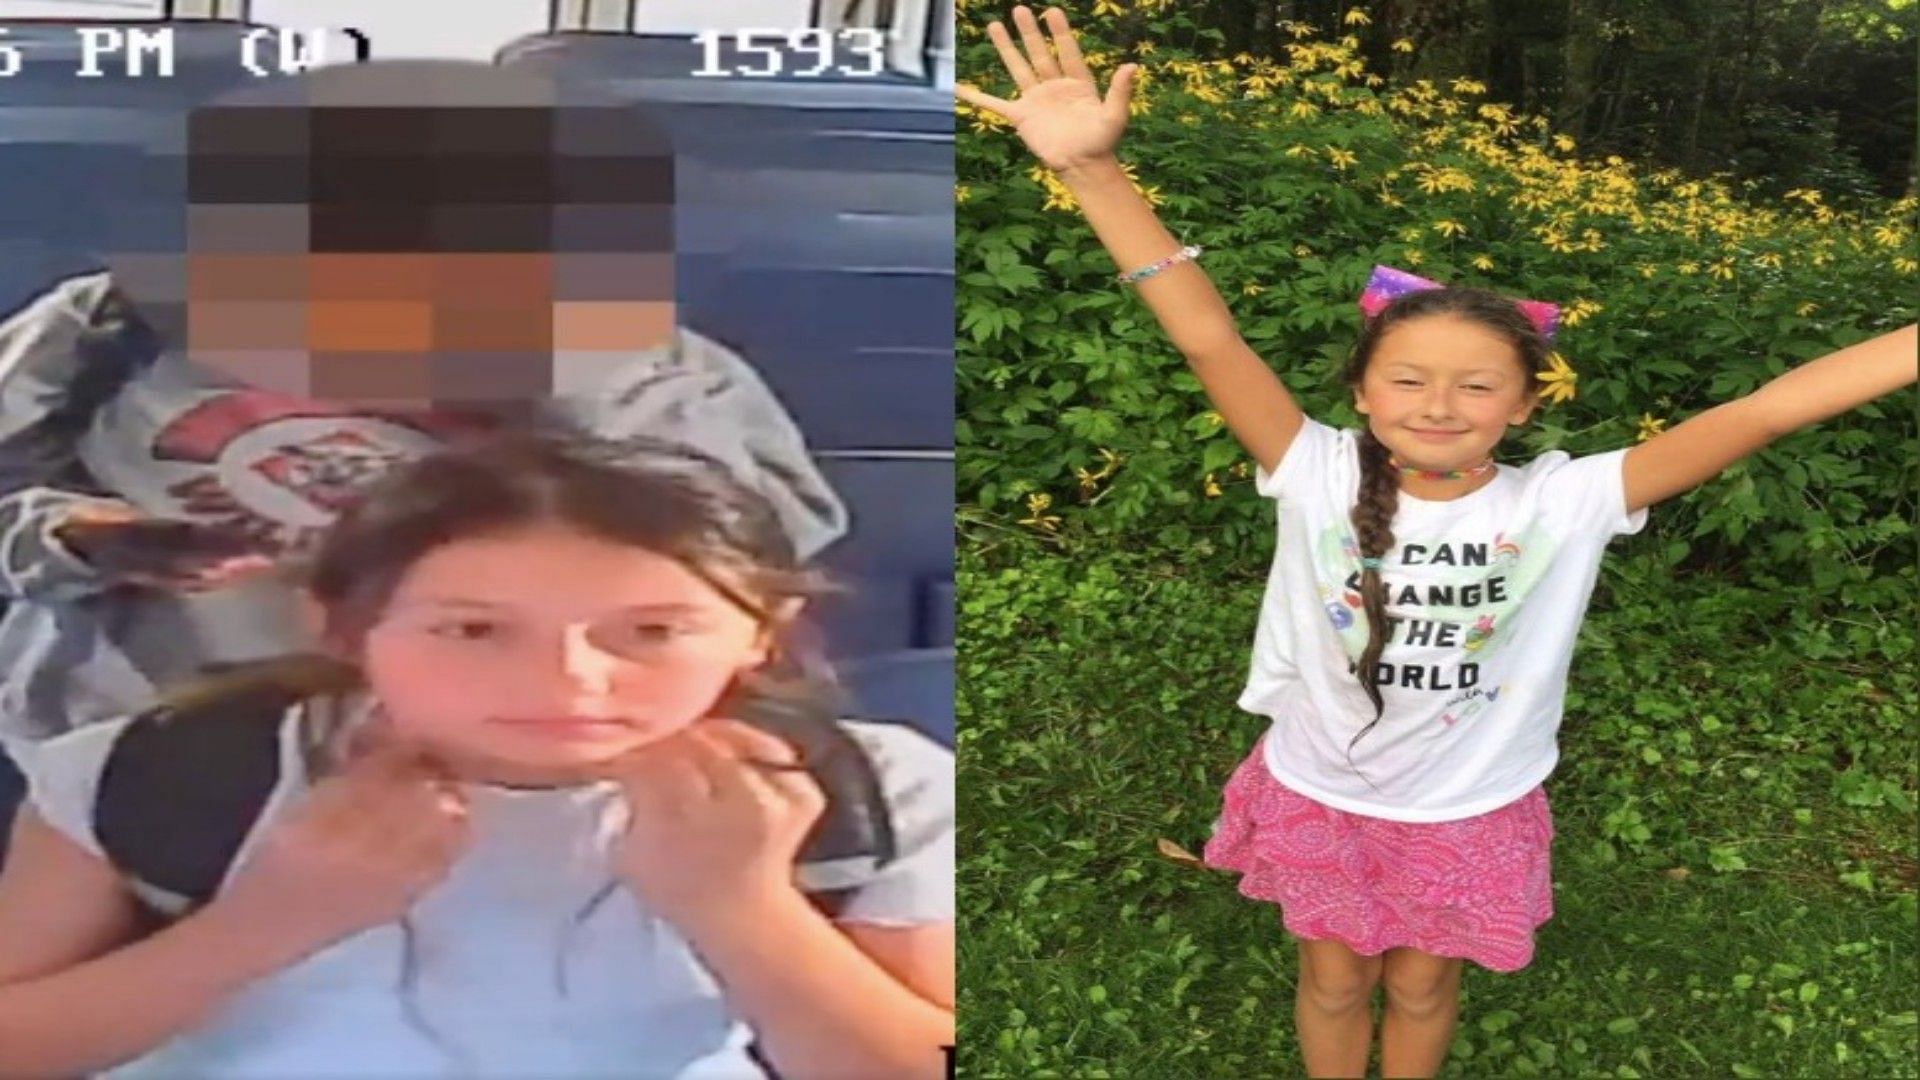 Watch Fbi Releases Video Showing Missing 11 Year Old Madalina Cojocari Getting Off School Bus 3194